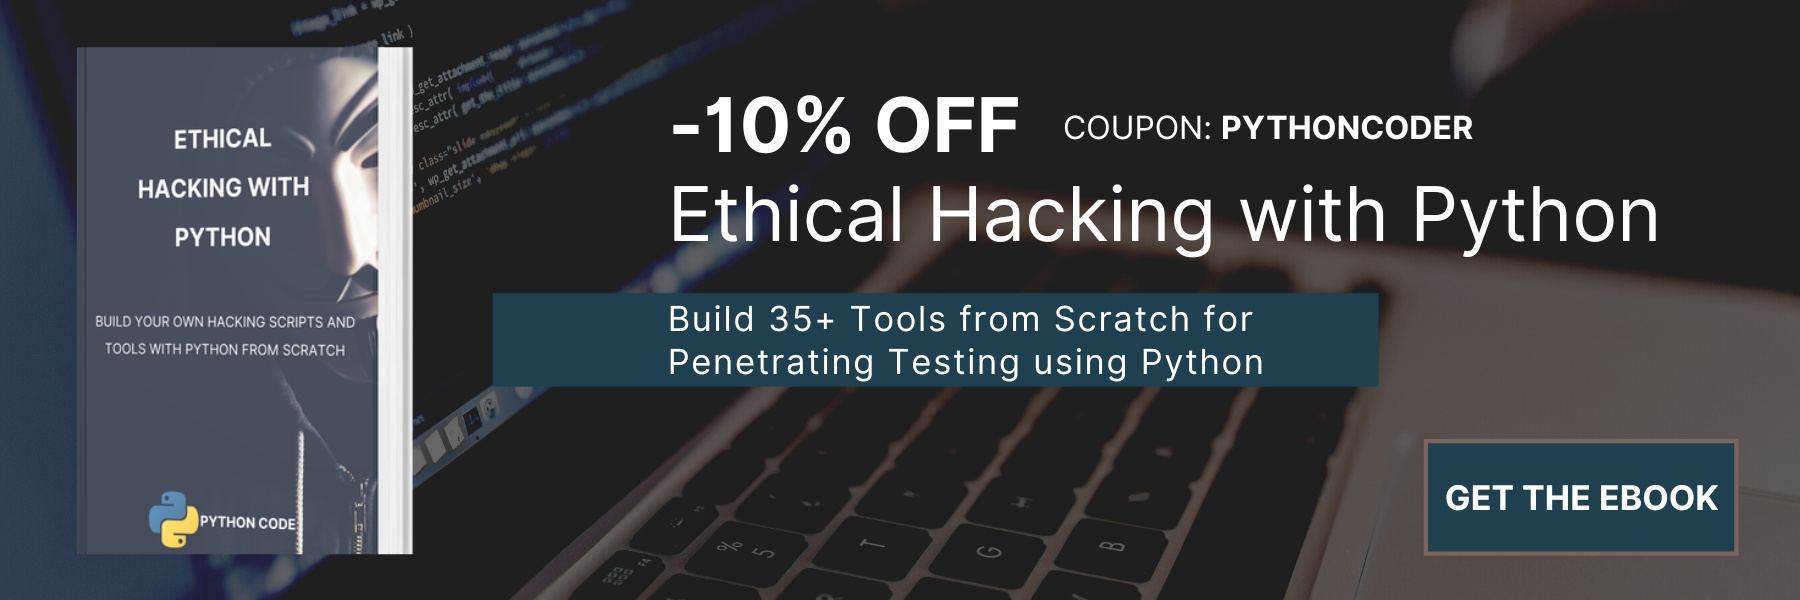 Ethical Hacking with Python eBook